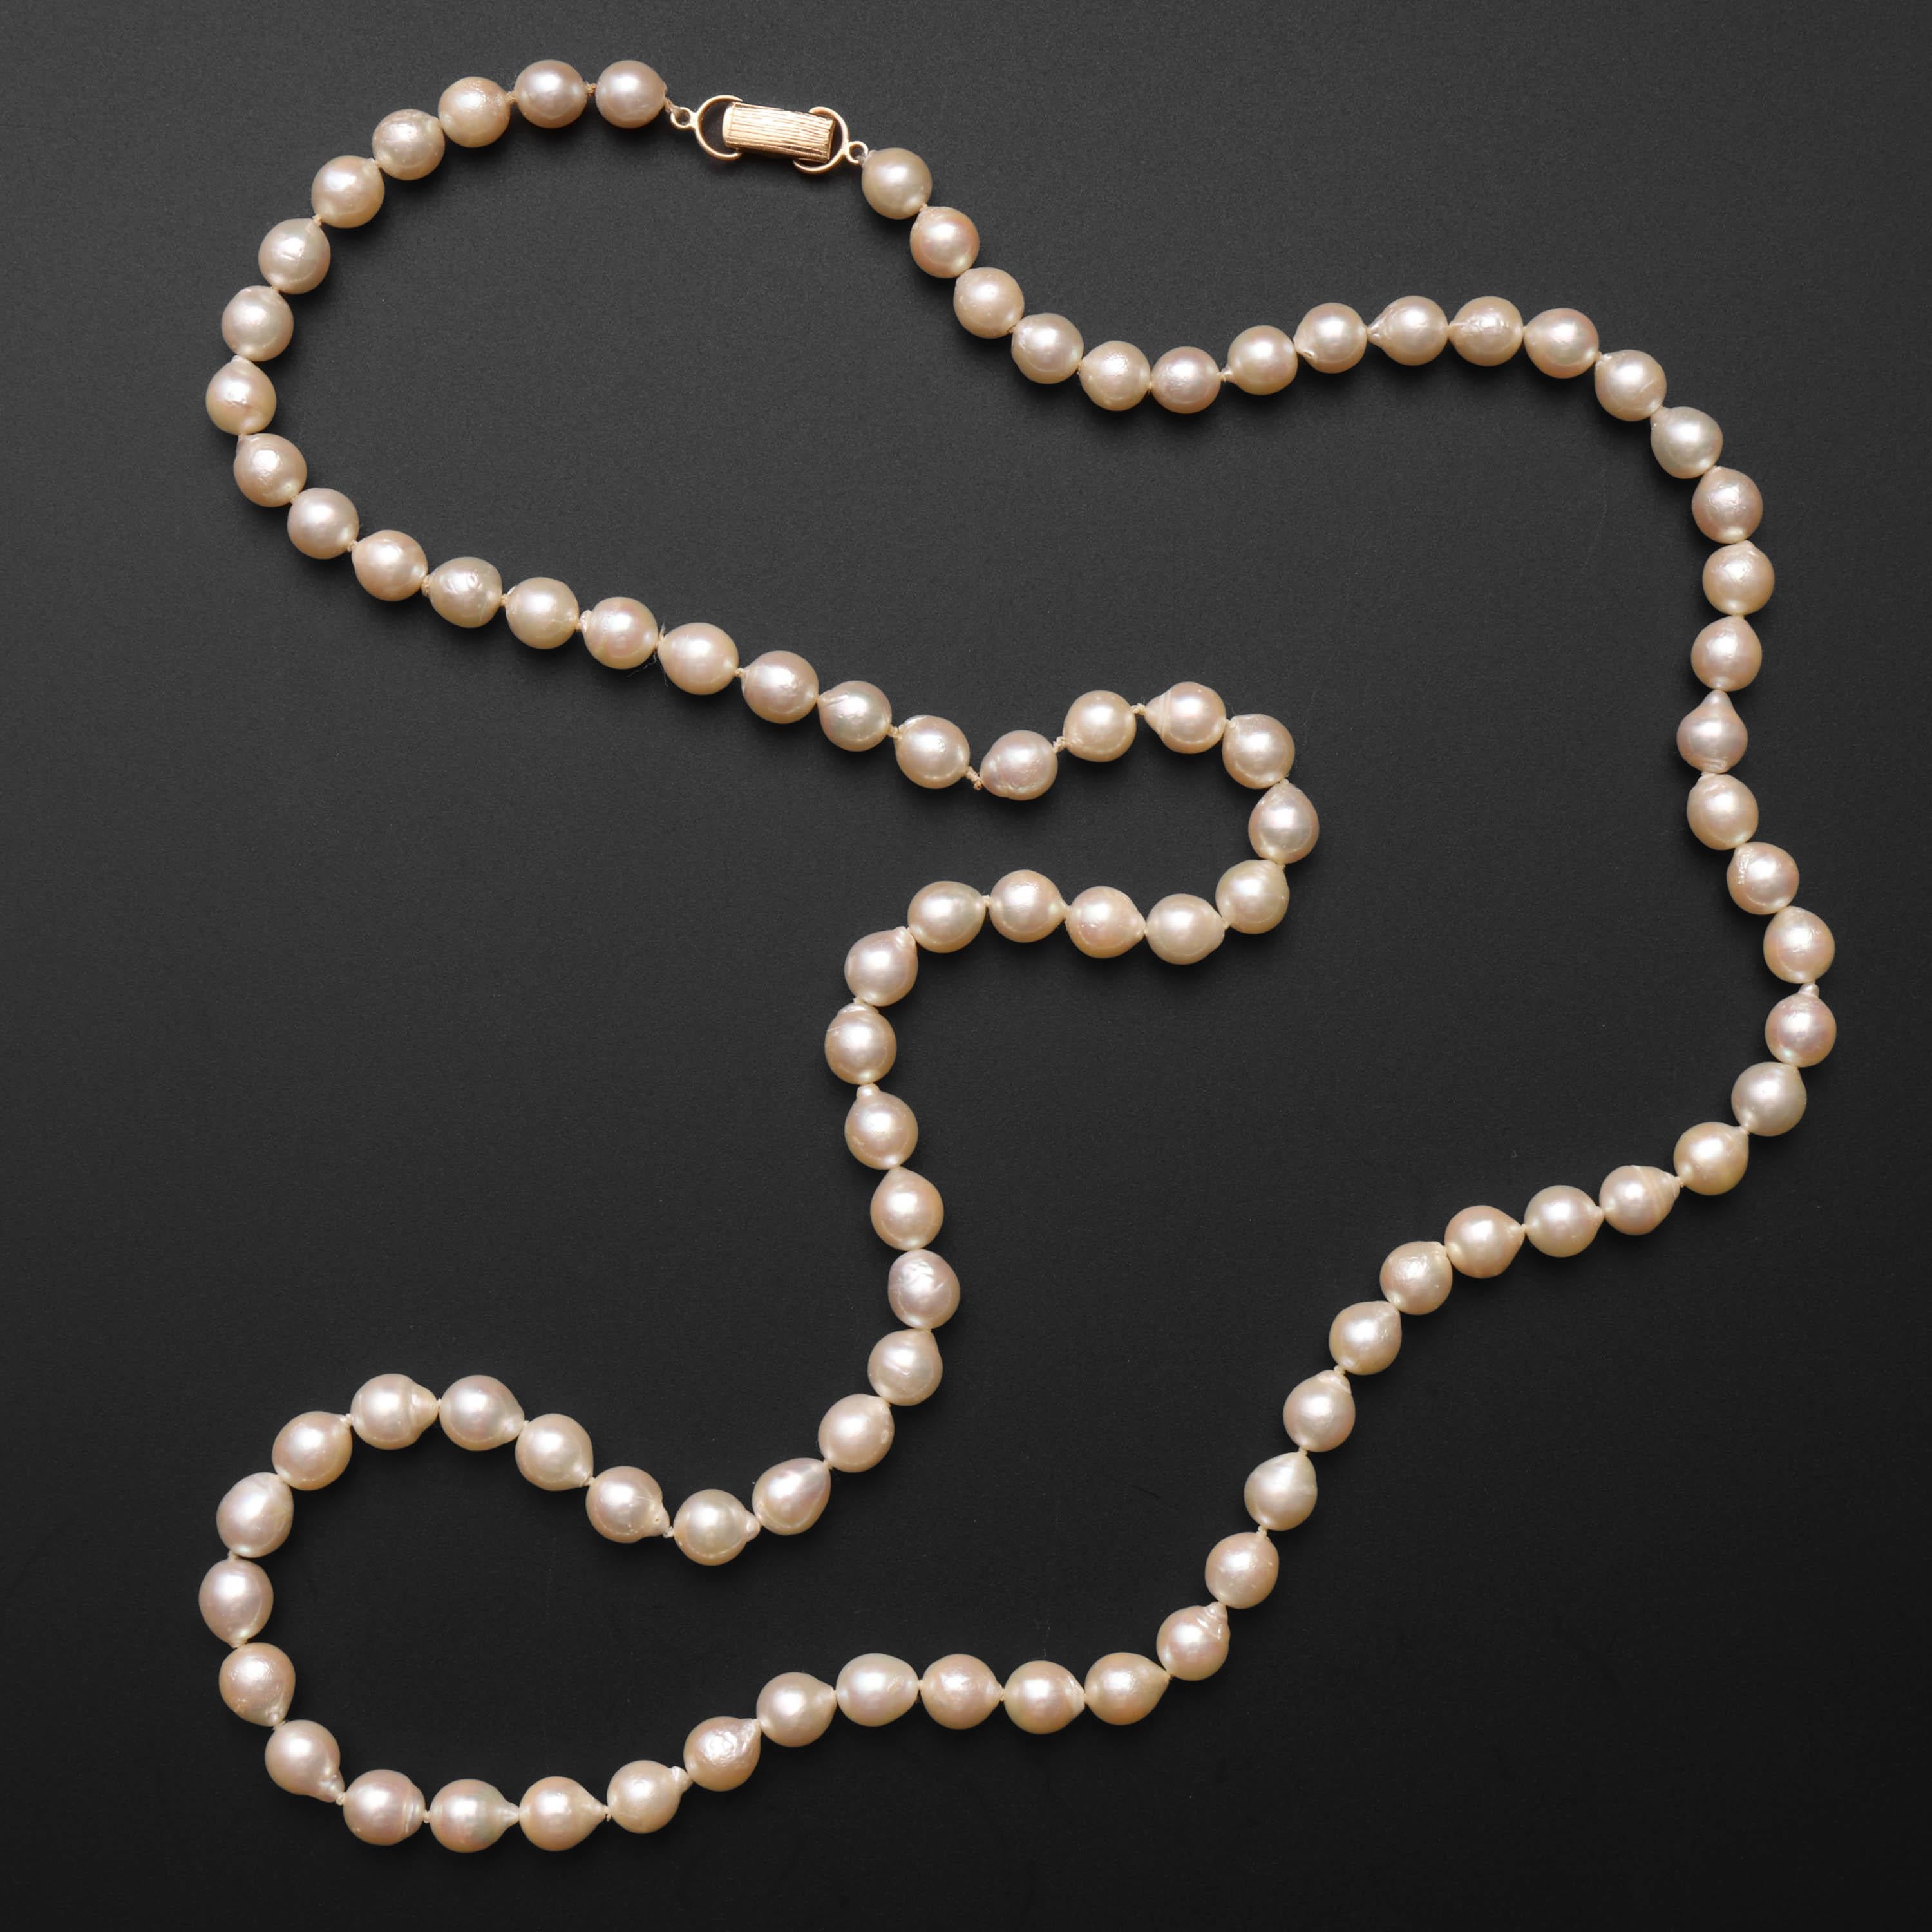 This cultured Akoya pearl necklace was created in the 1970s by venerable Hawaiian luxury jeweler, Ming's. Composed of 89 semi-baroque gleaming Akoya pearls that average 7.5mm, the 31